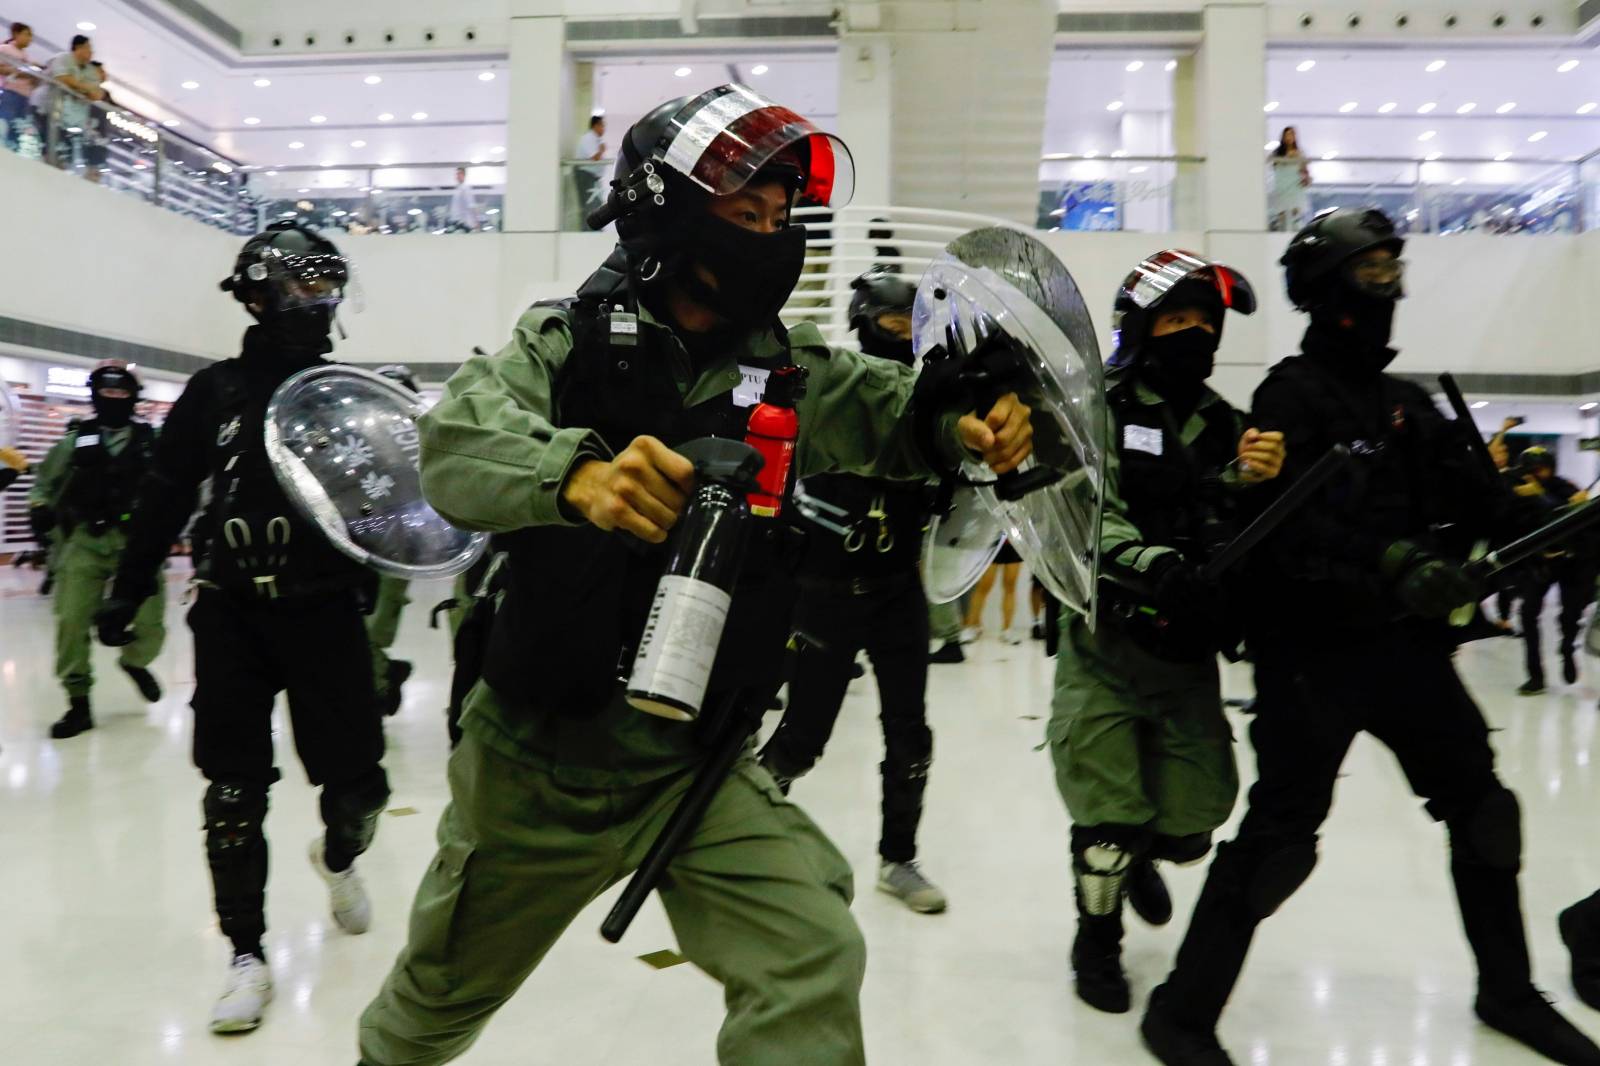 Riot police disperse anti-government protesters at a shopping mall in Tai Po, Hong Kong